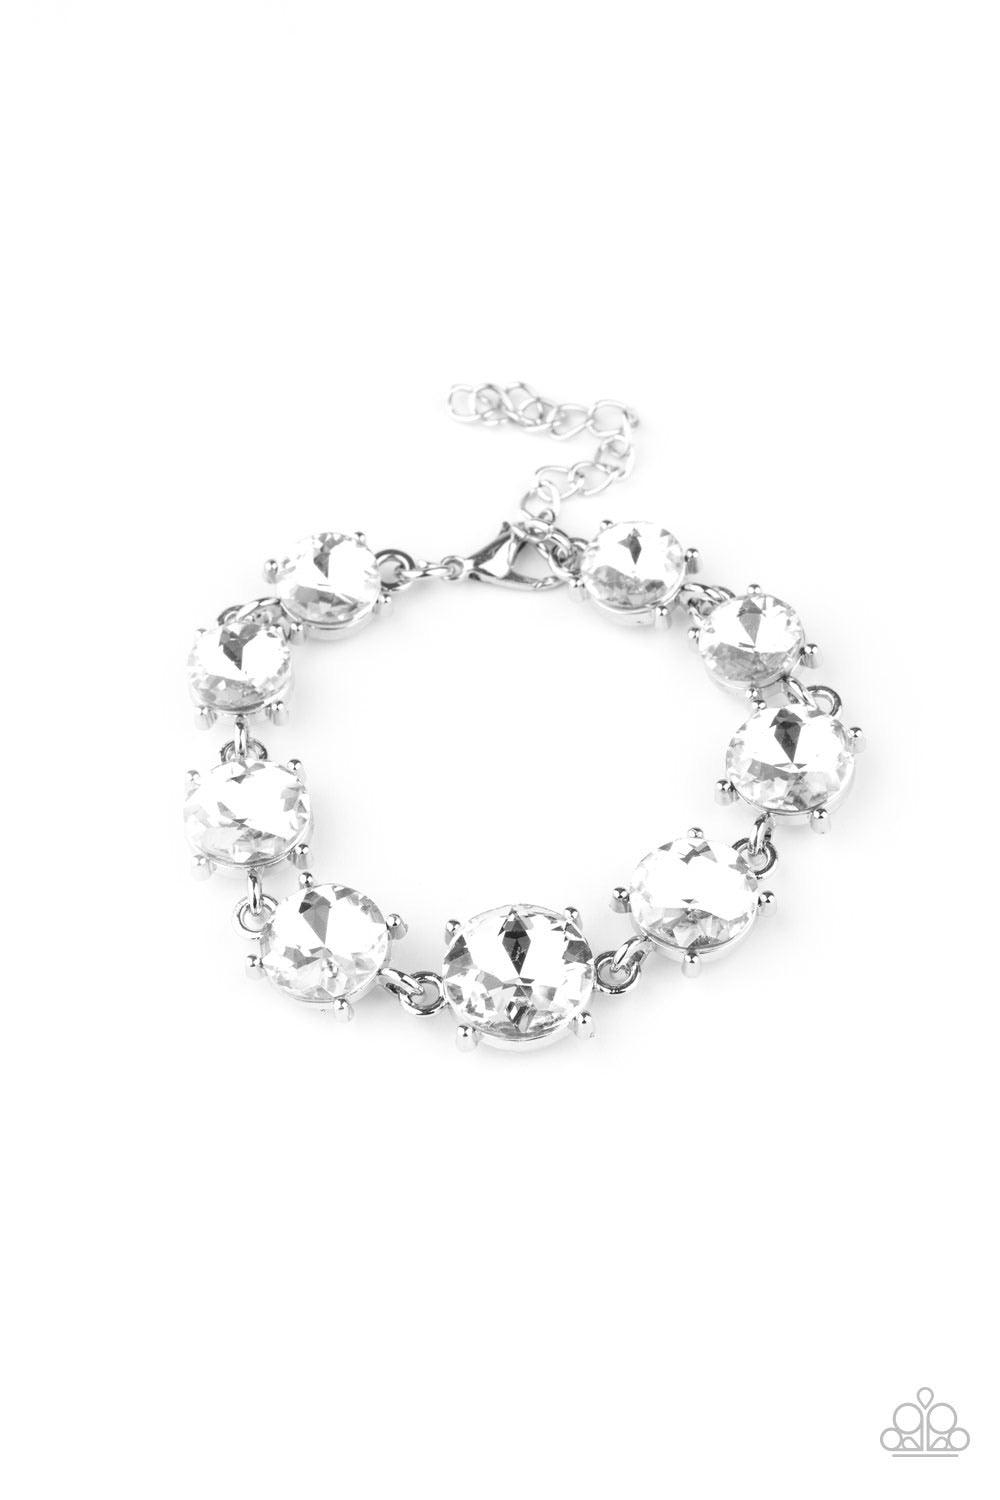 Paparazzi Accessories Can’t Believe My ICE - White Gradually increasing in size at the center, a dramatic row of exaggerated white rhinestone encrusted silver frames delicately link around the wrist for a statement-making sparkle. Features an adjustable c